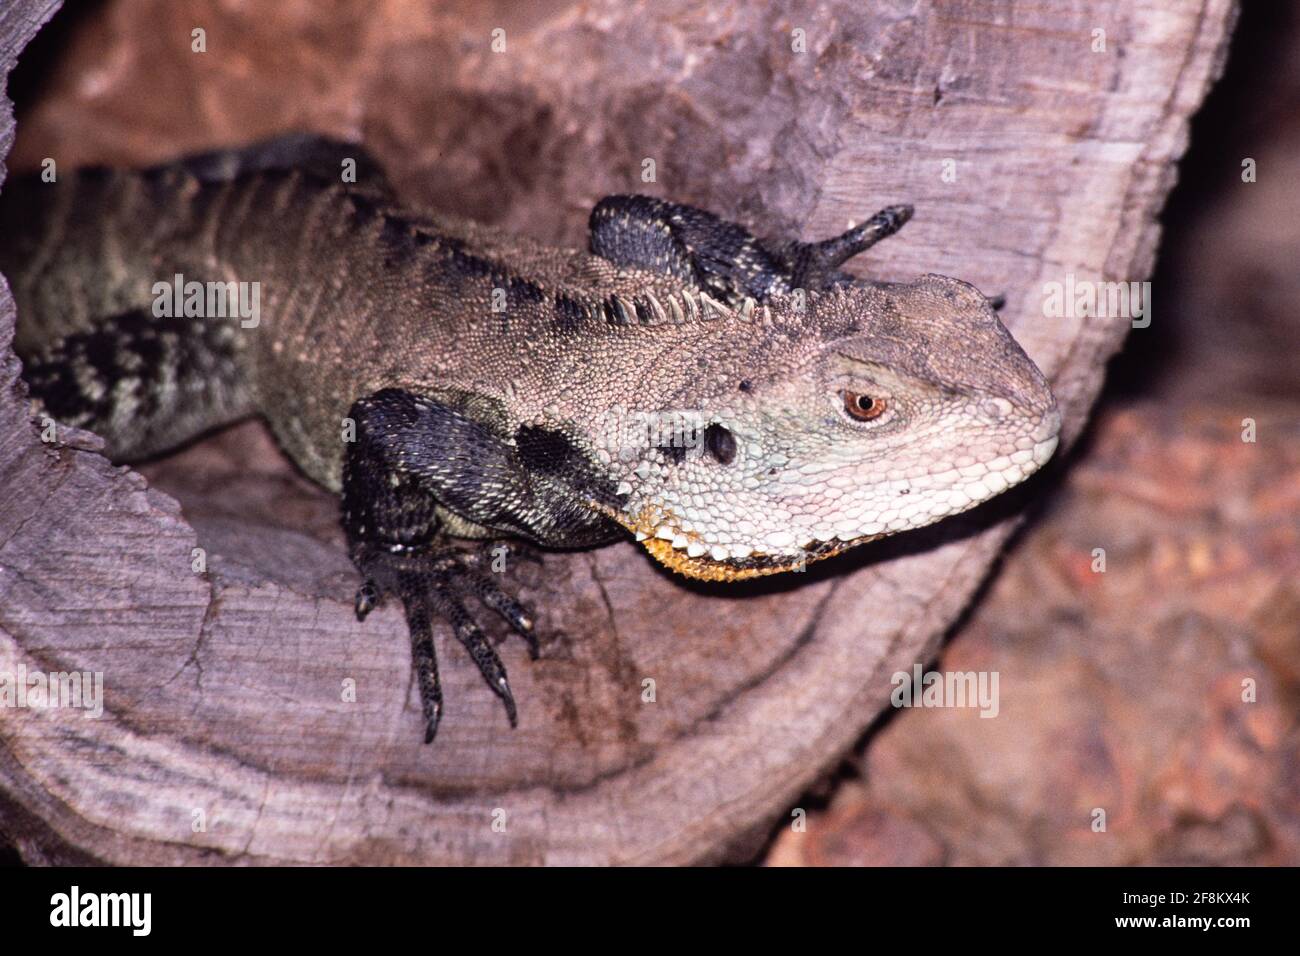 The Gippsland Water Dragon, Intellagama lesueurii howittii, is a subspecies of the Australian Water Dragon. Stock Photo